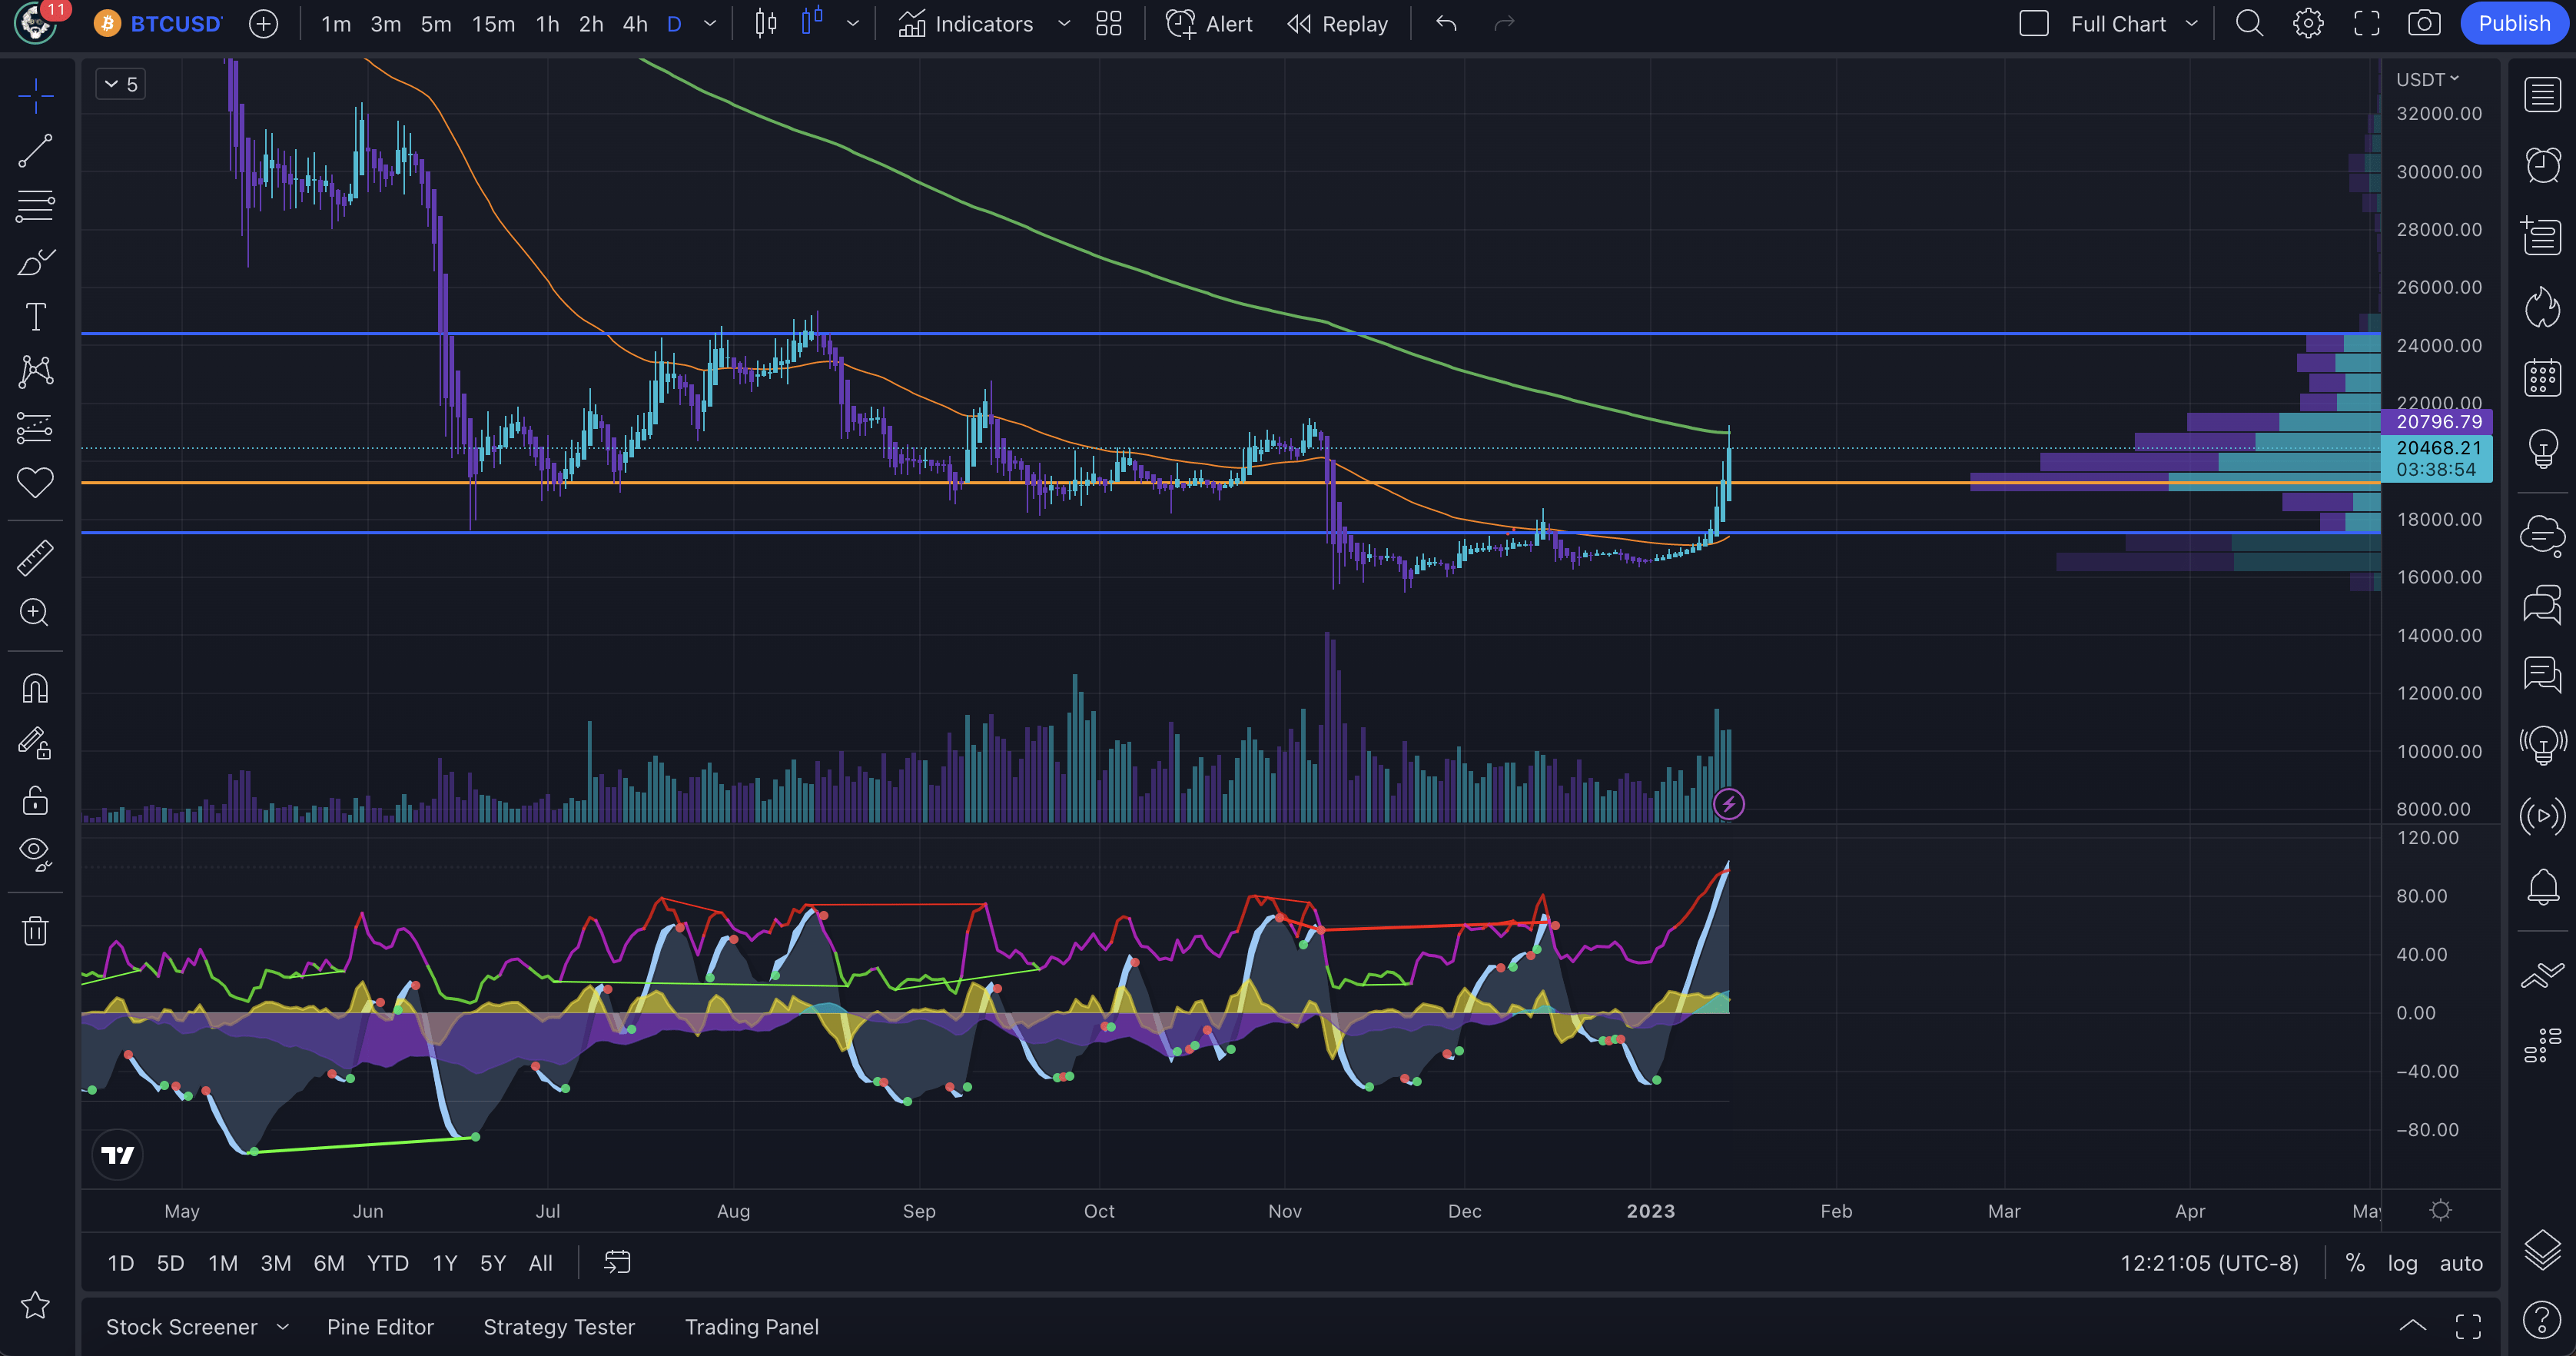 bitcoin daily time frame showing volume profile and testing the 200 day moving average as resistance.